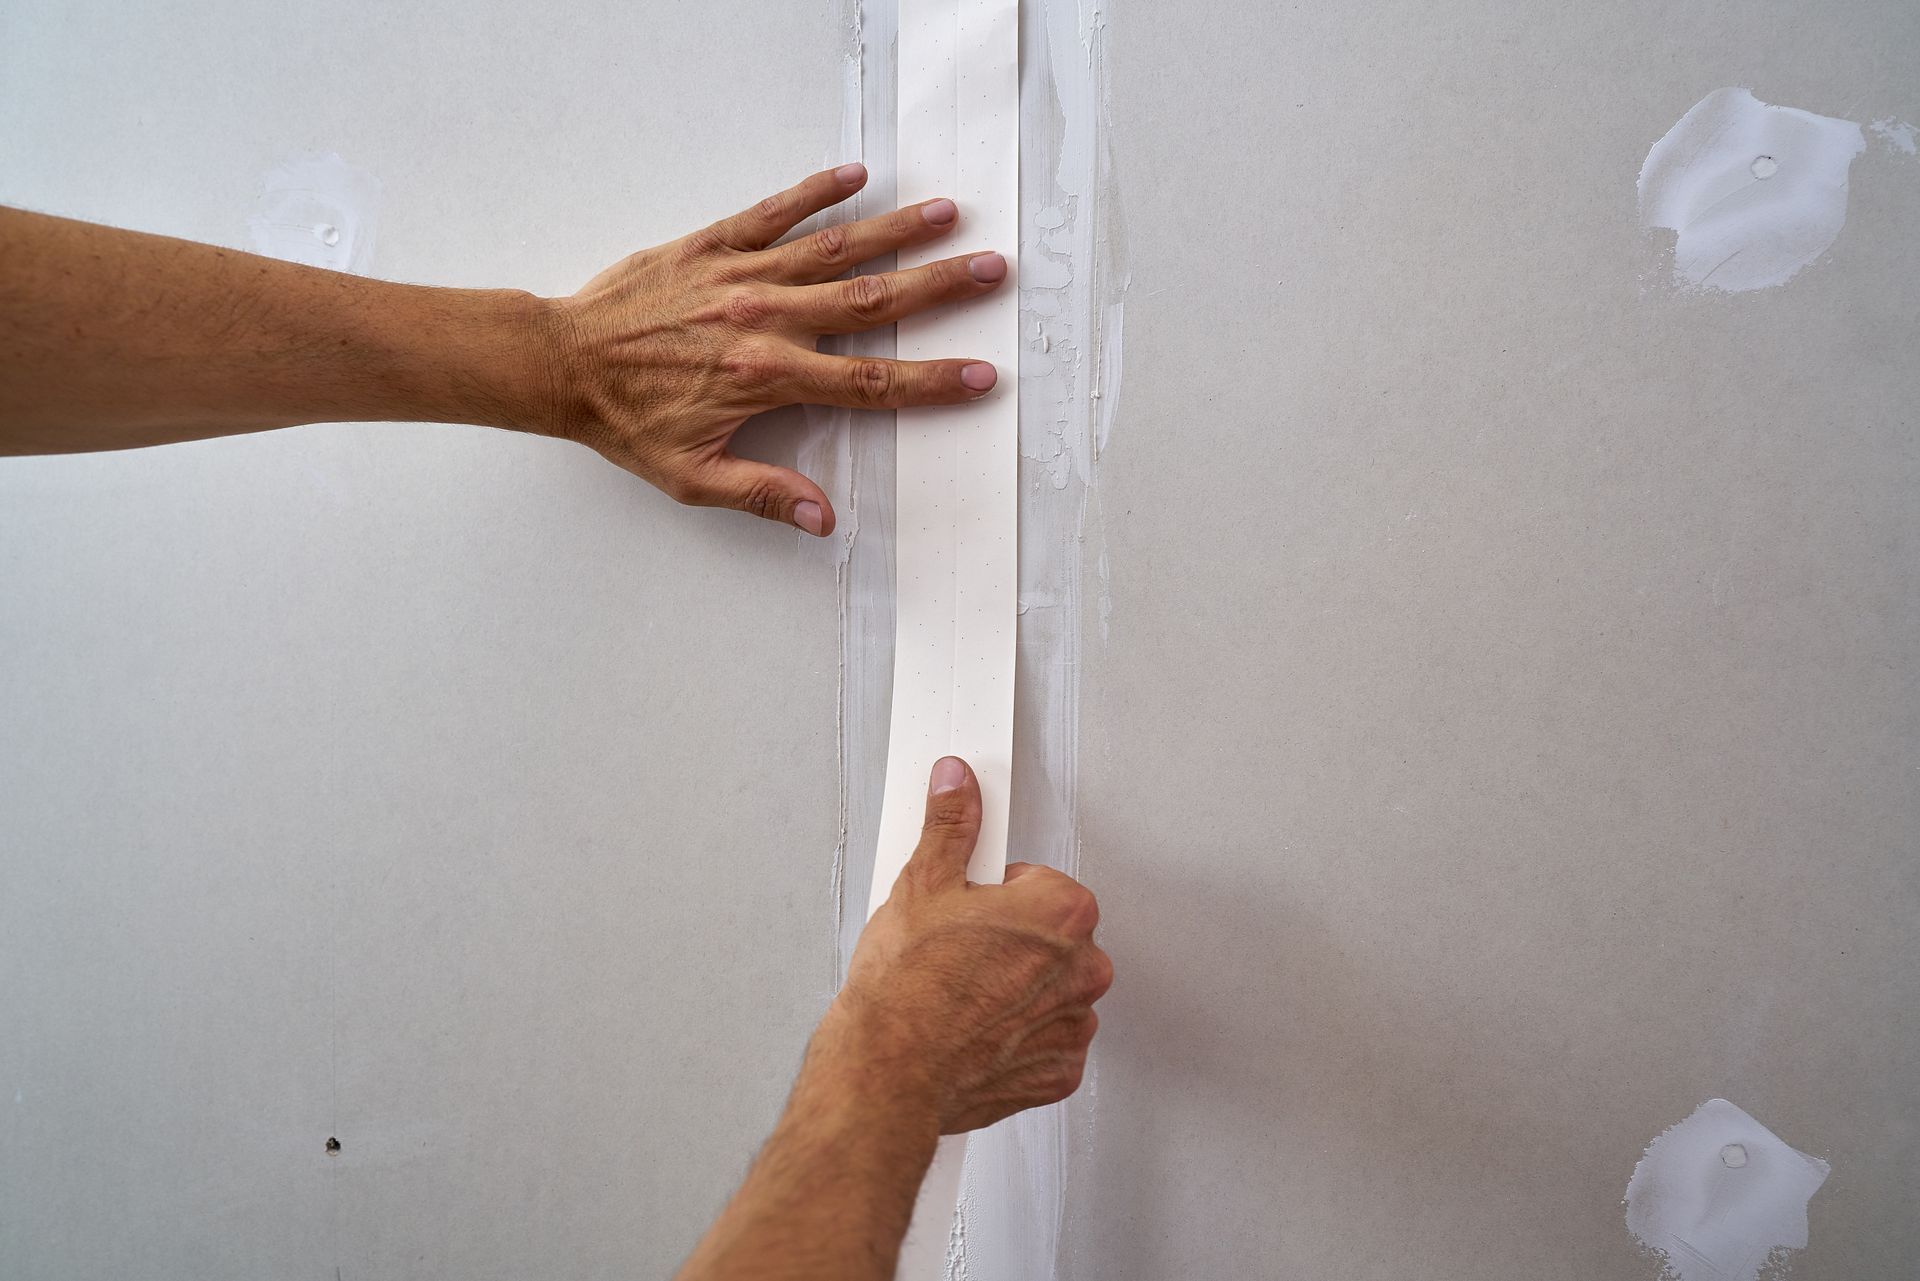 A person is taping a corner of a wall with tape.